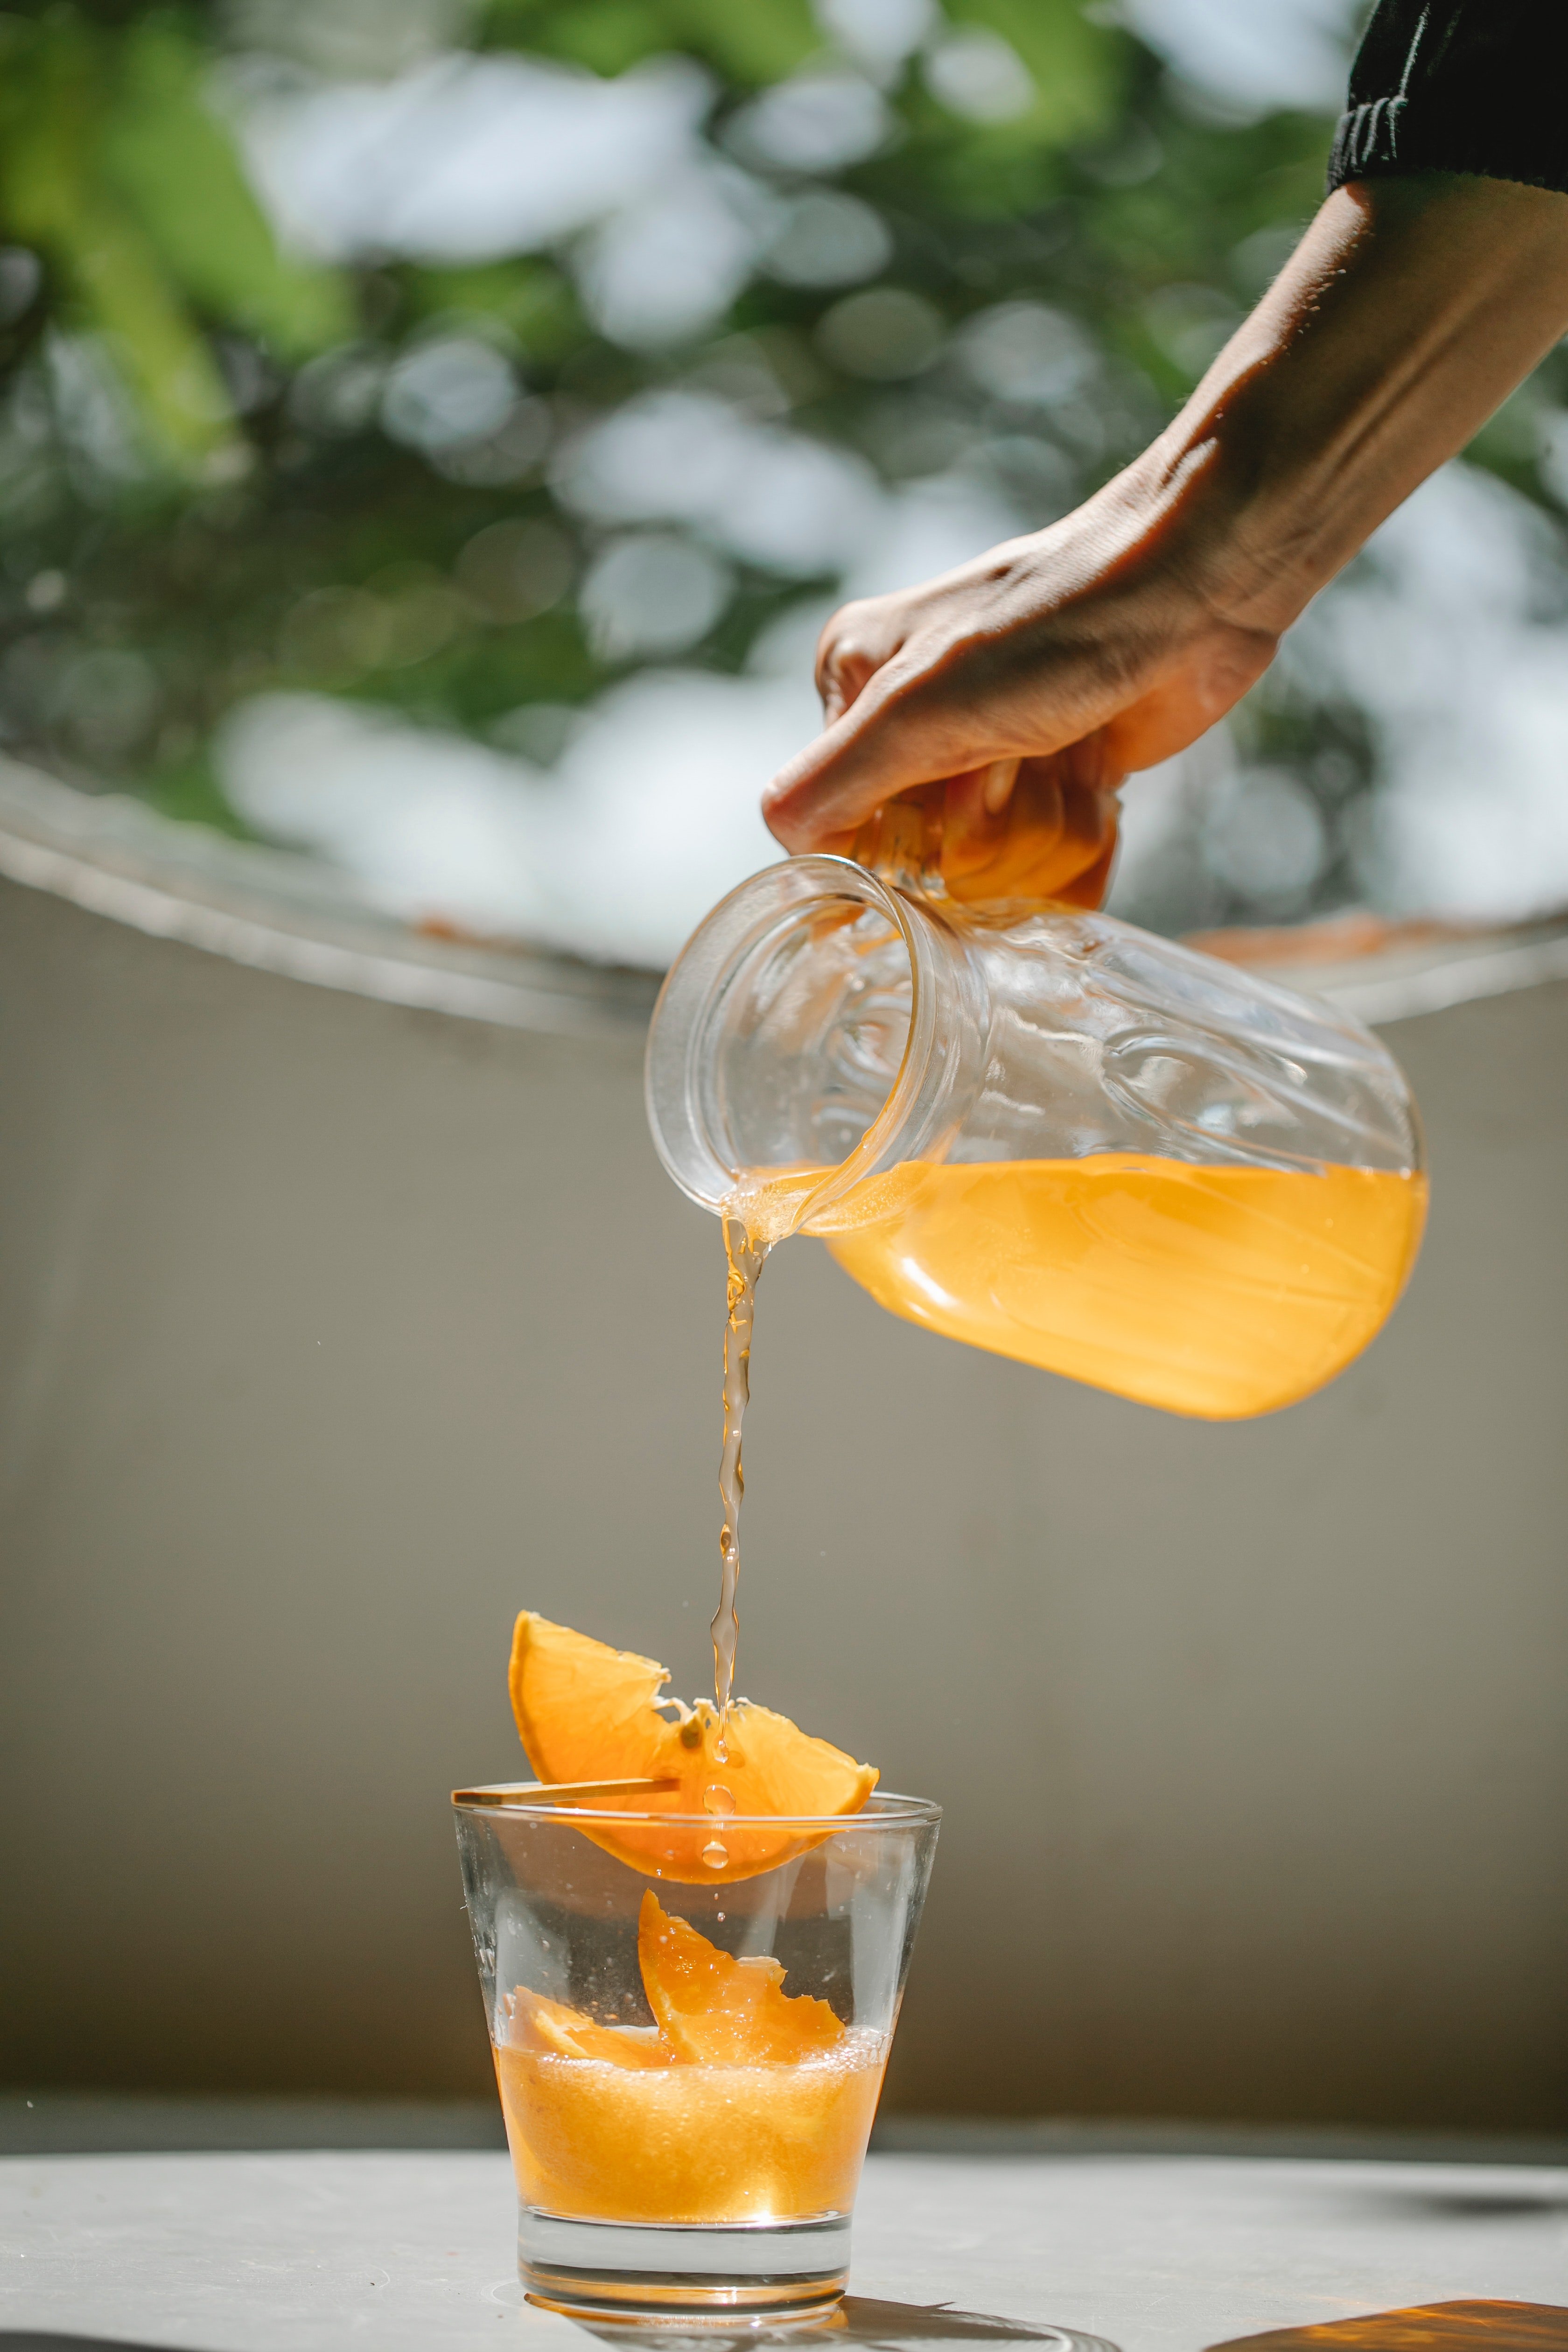 A woman pouring cold orange beverage into glass. | Source: Pexels